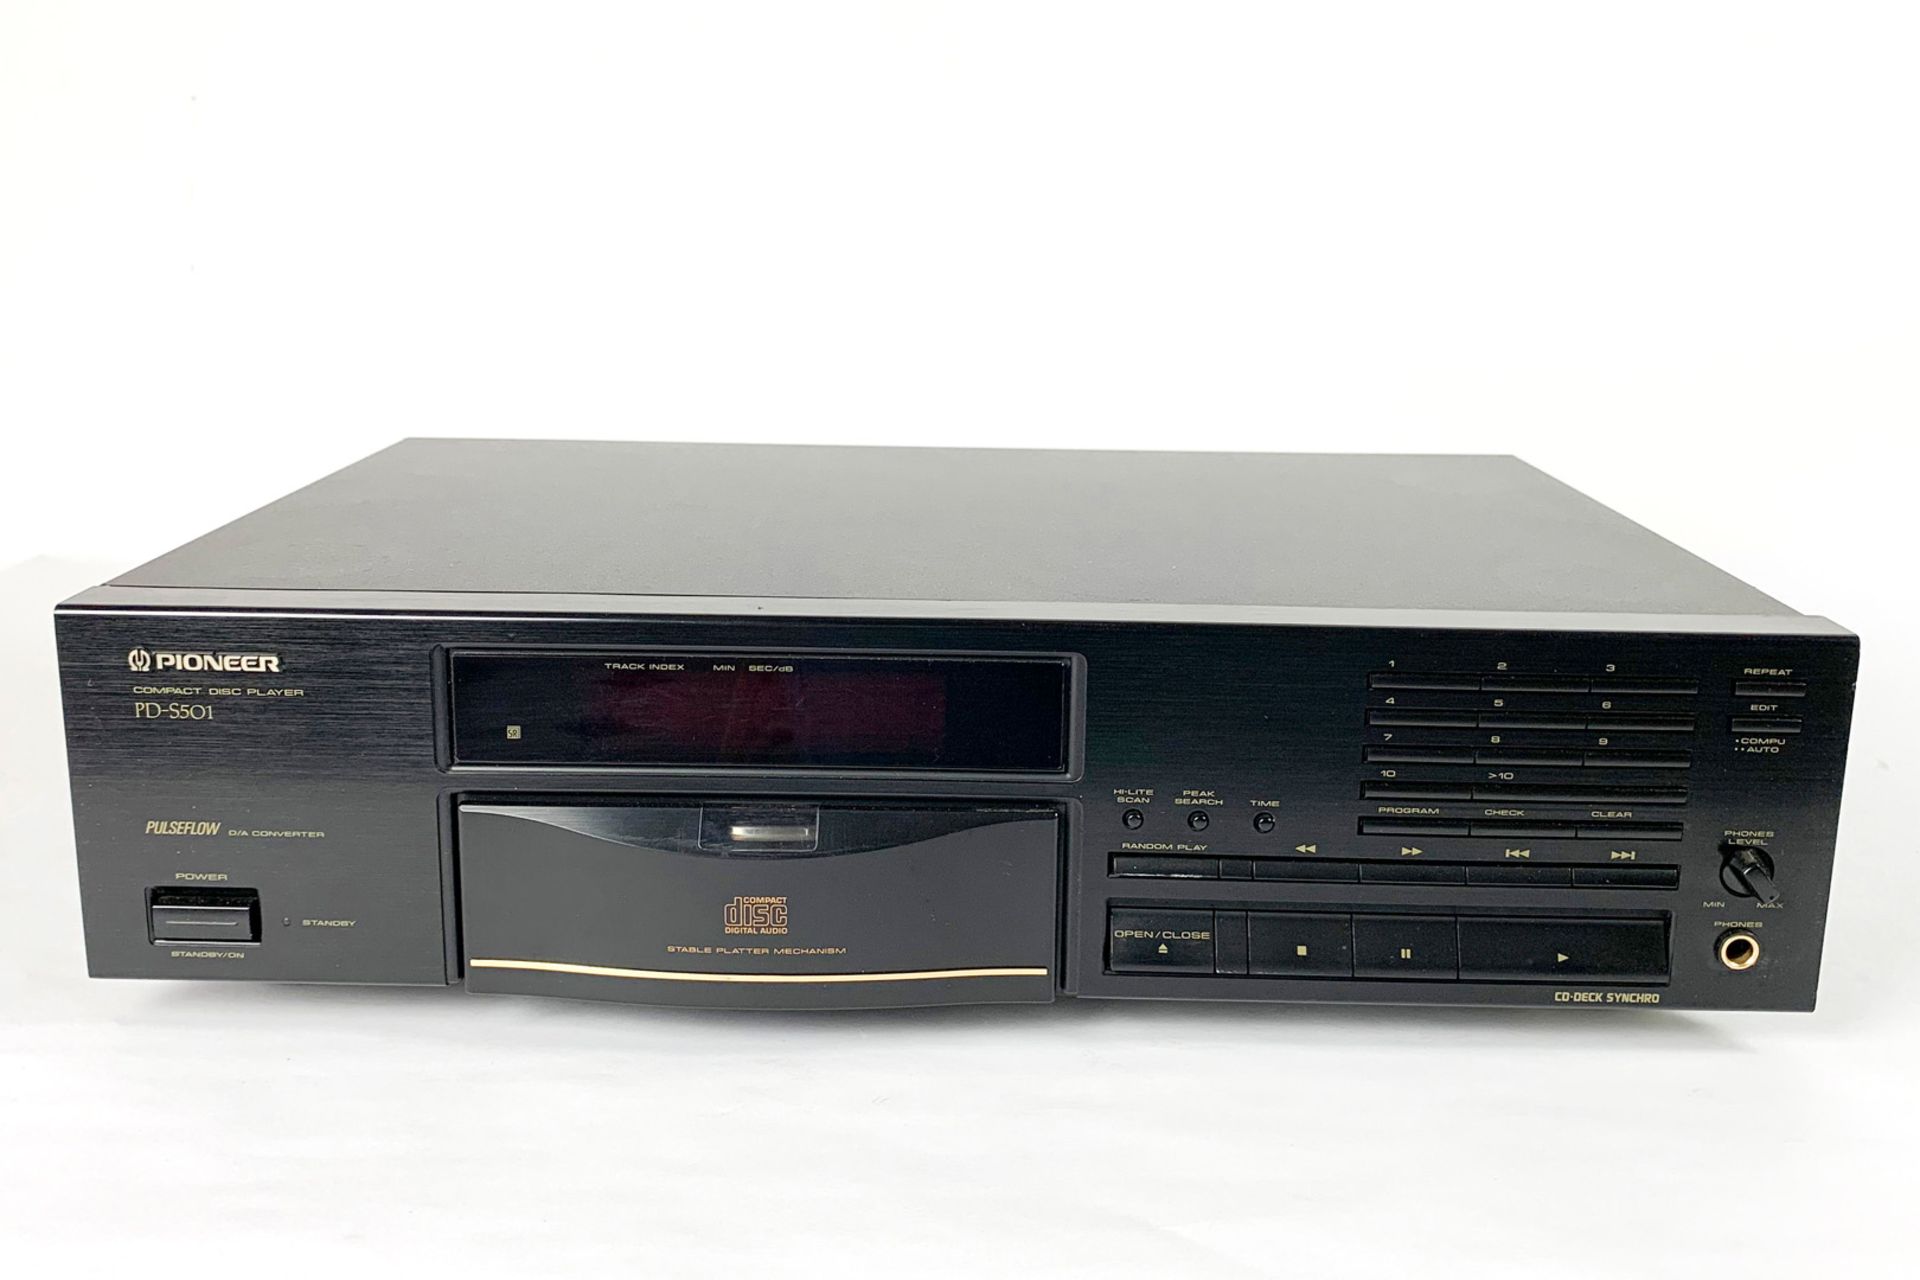 Pioneer Compact Disc Player, Model No. PD-S501, Seriennr. ME7417060 ME, L 42, Z 2